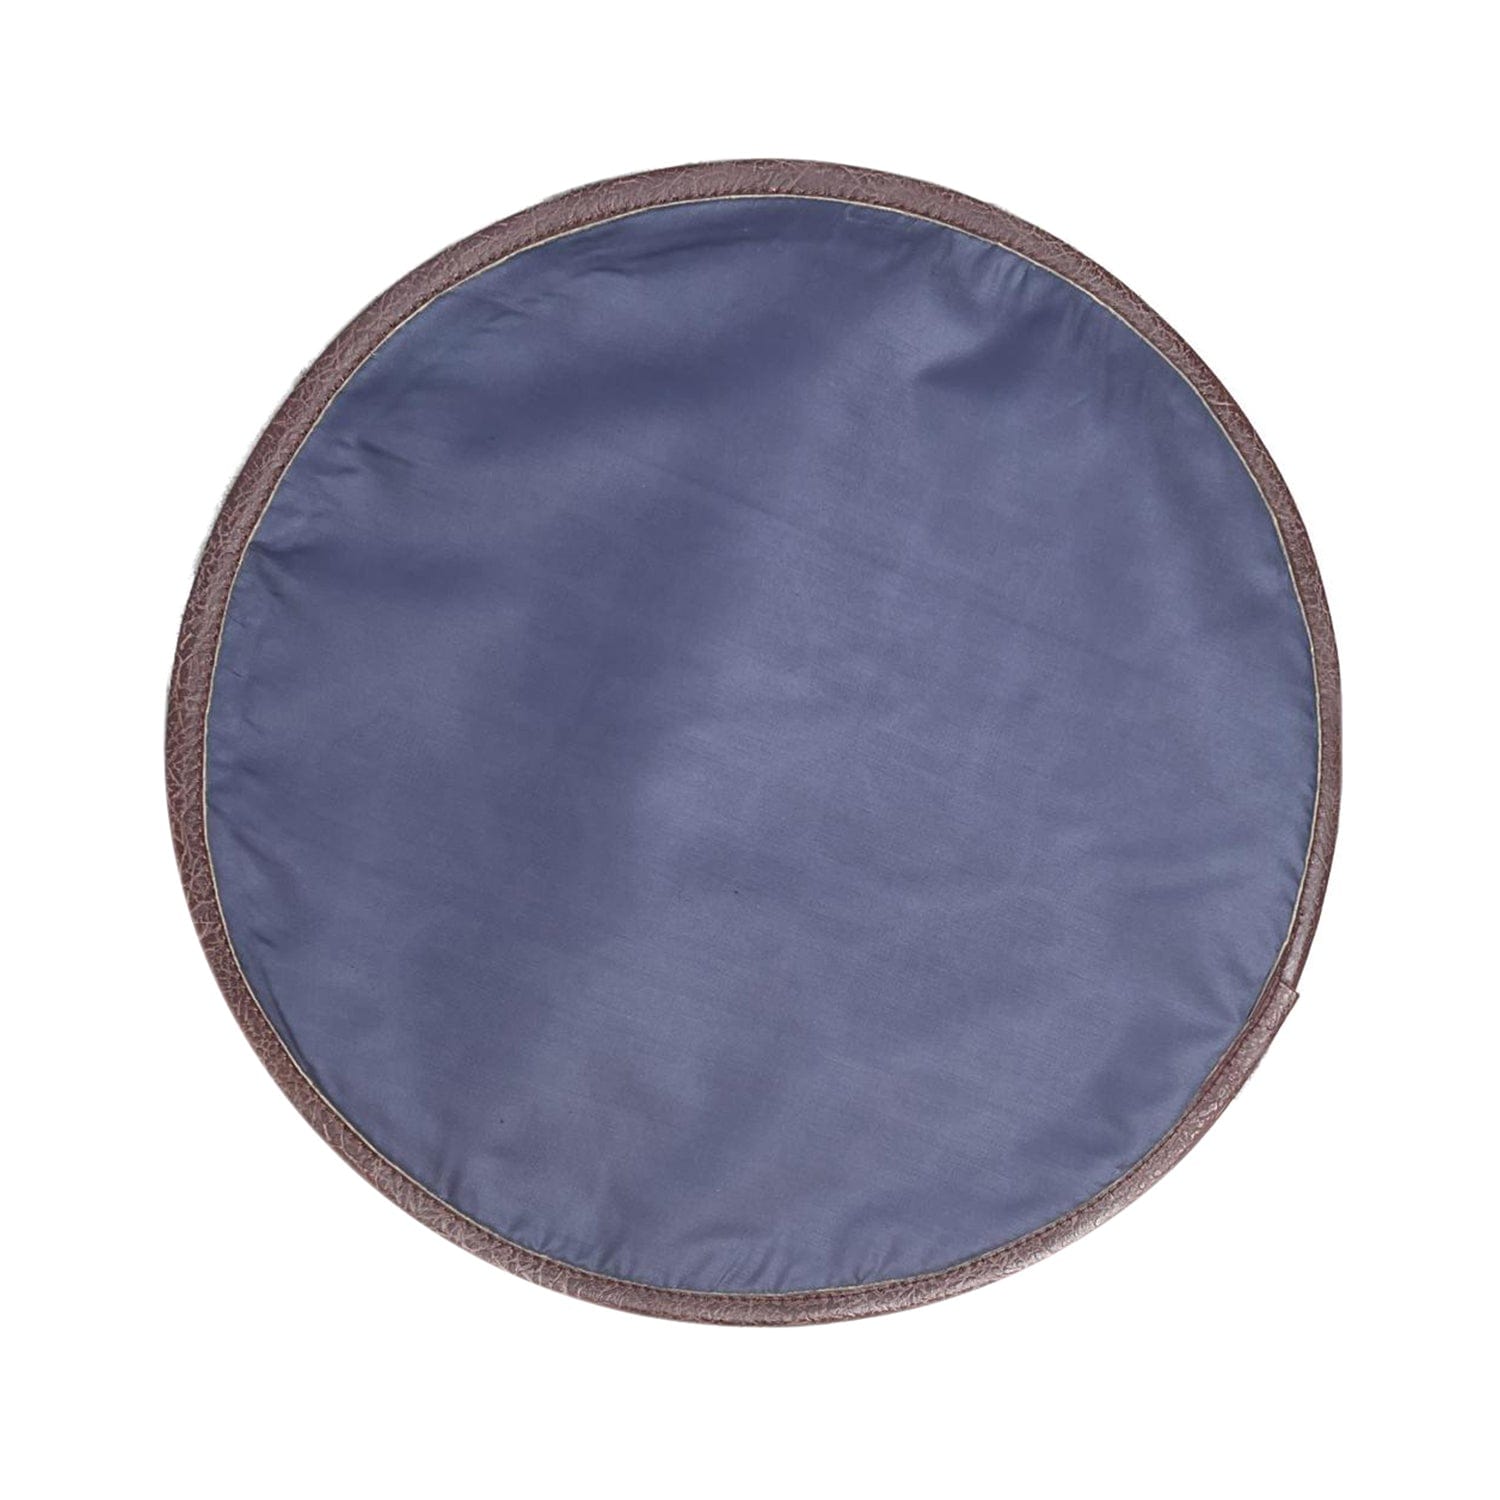 Mona B Set of 2 Printed Mosaic Placemats, 13 INCH Round, Best for Bed-Side Table/Center Table, Dining Table/Shelves (Mosaic) - Placemat by Mona-B - Backpack, Flat30, New Arrivals, Sale, Shop1999, Shop2999, Shop3999